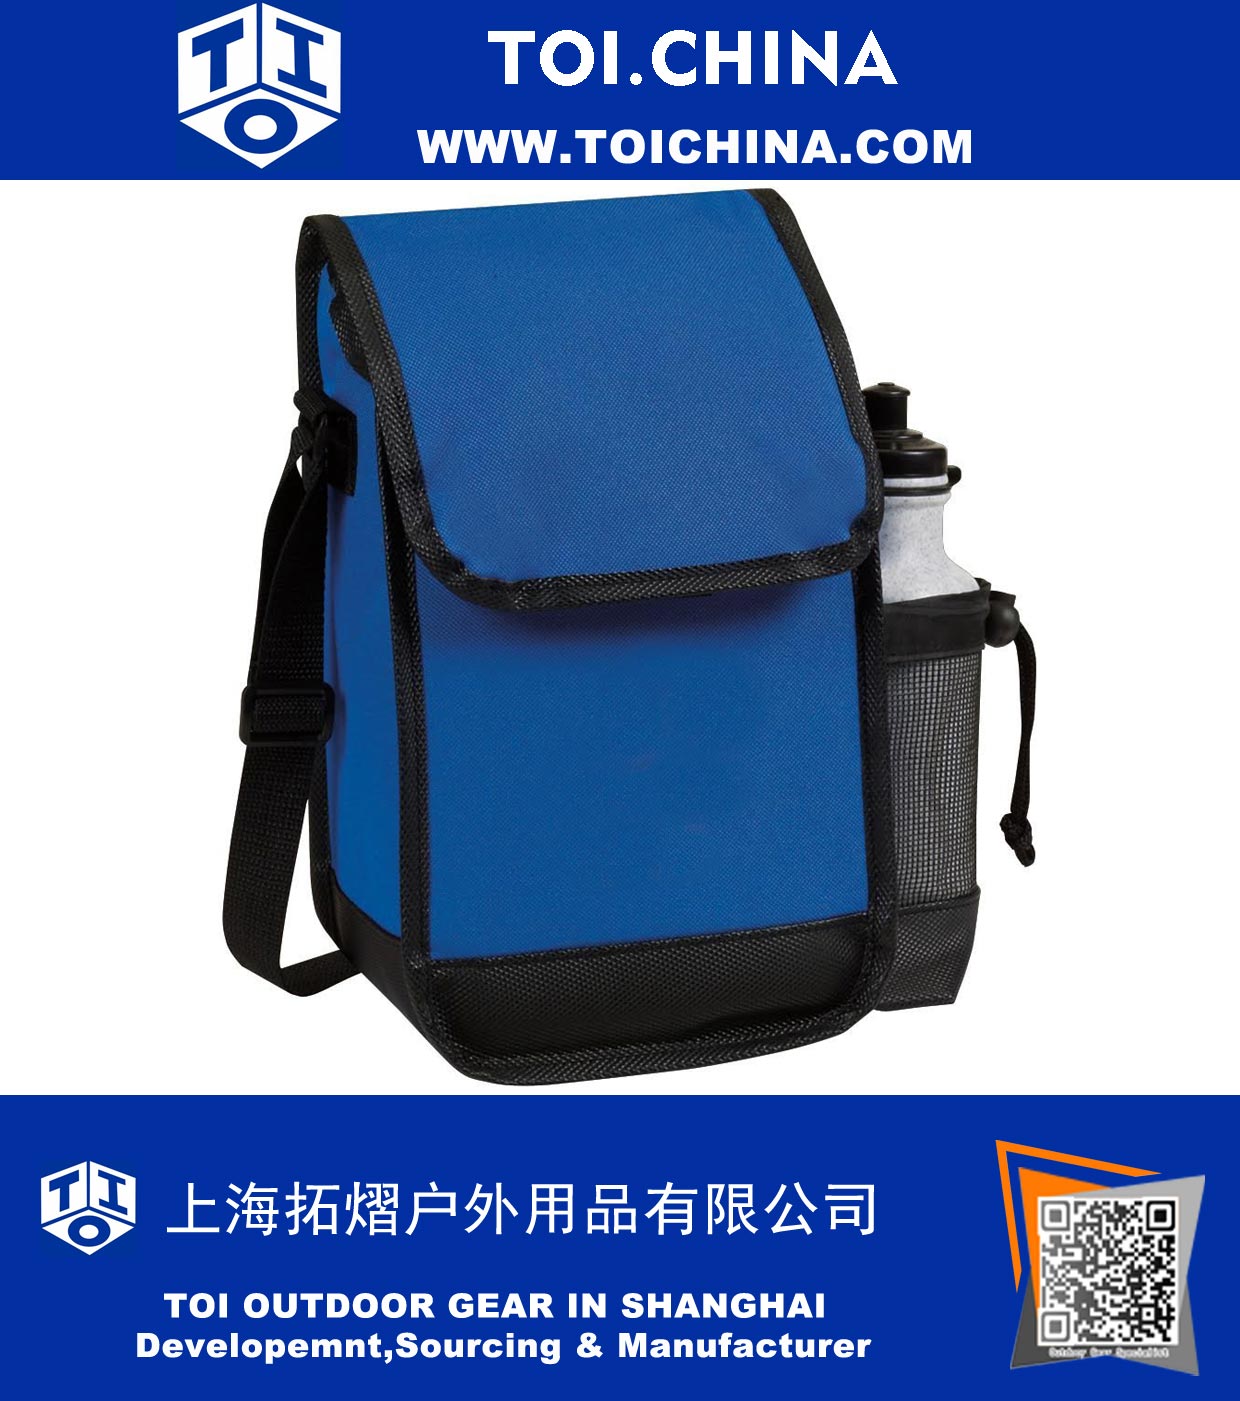 Thermal Insulated Cooler Lunch Bag 600D Polyester PVC Backing with Leatherette Trim Side Bottle Holder